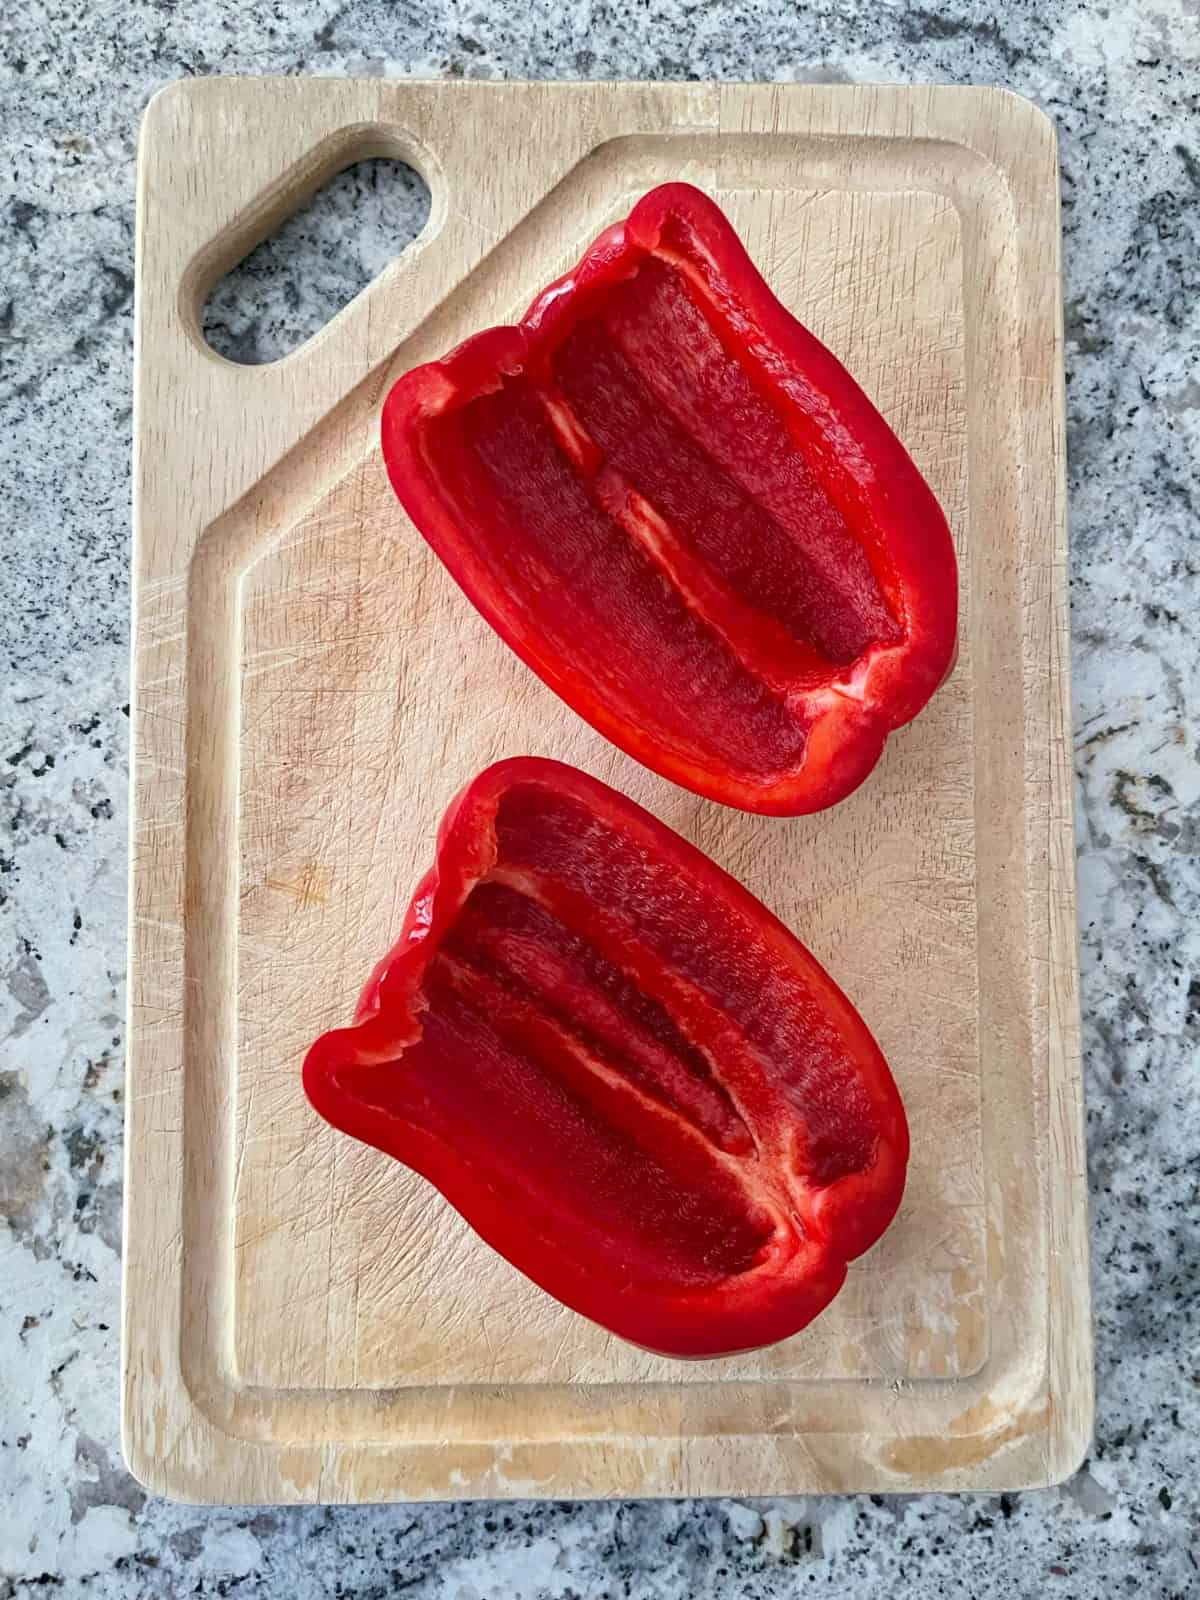 One red bell pepper halved lengthwise with stem, seeds and white membranes removed on wood cutting board.